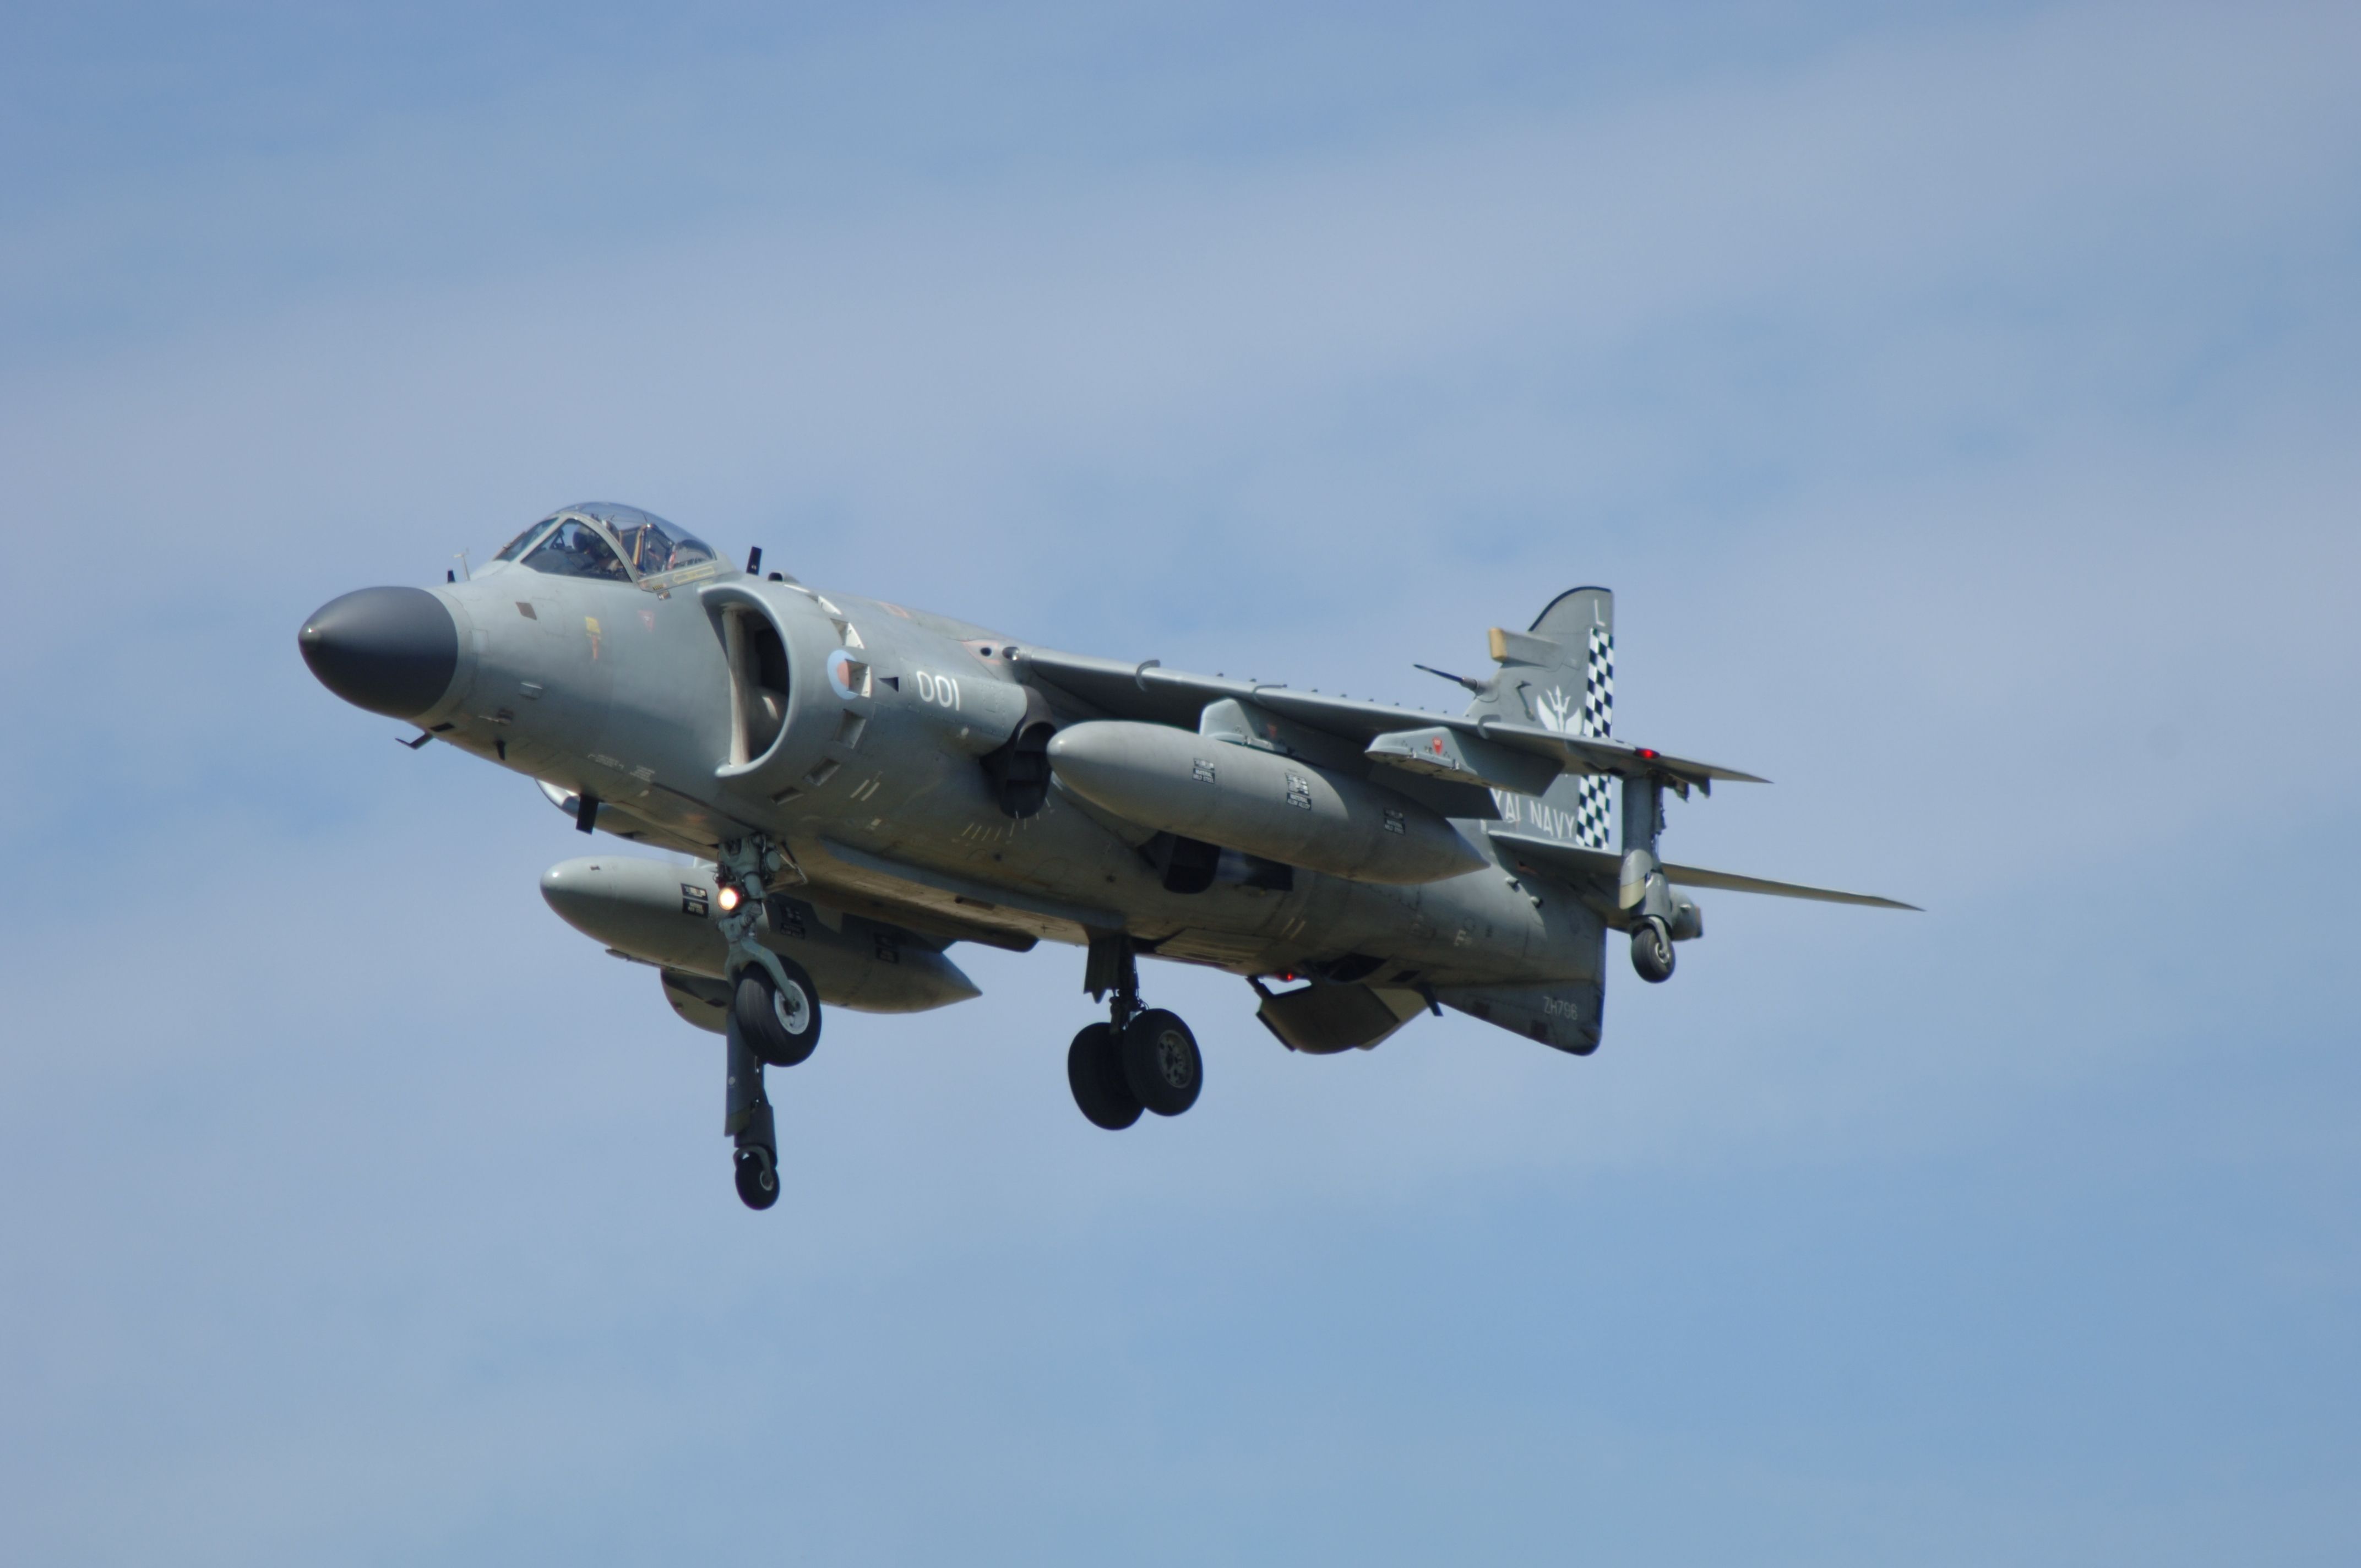 A Royal Navy FA2 Sea Harrier Jump jet flying in the sky.